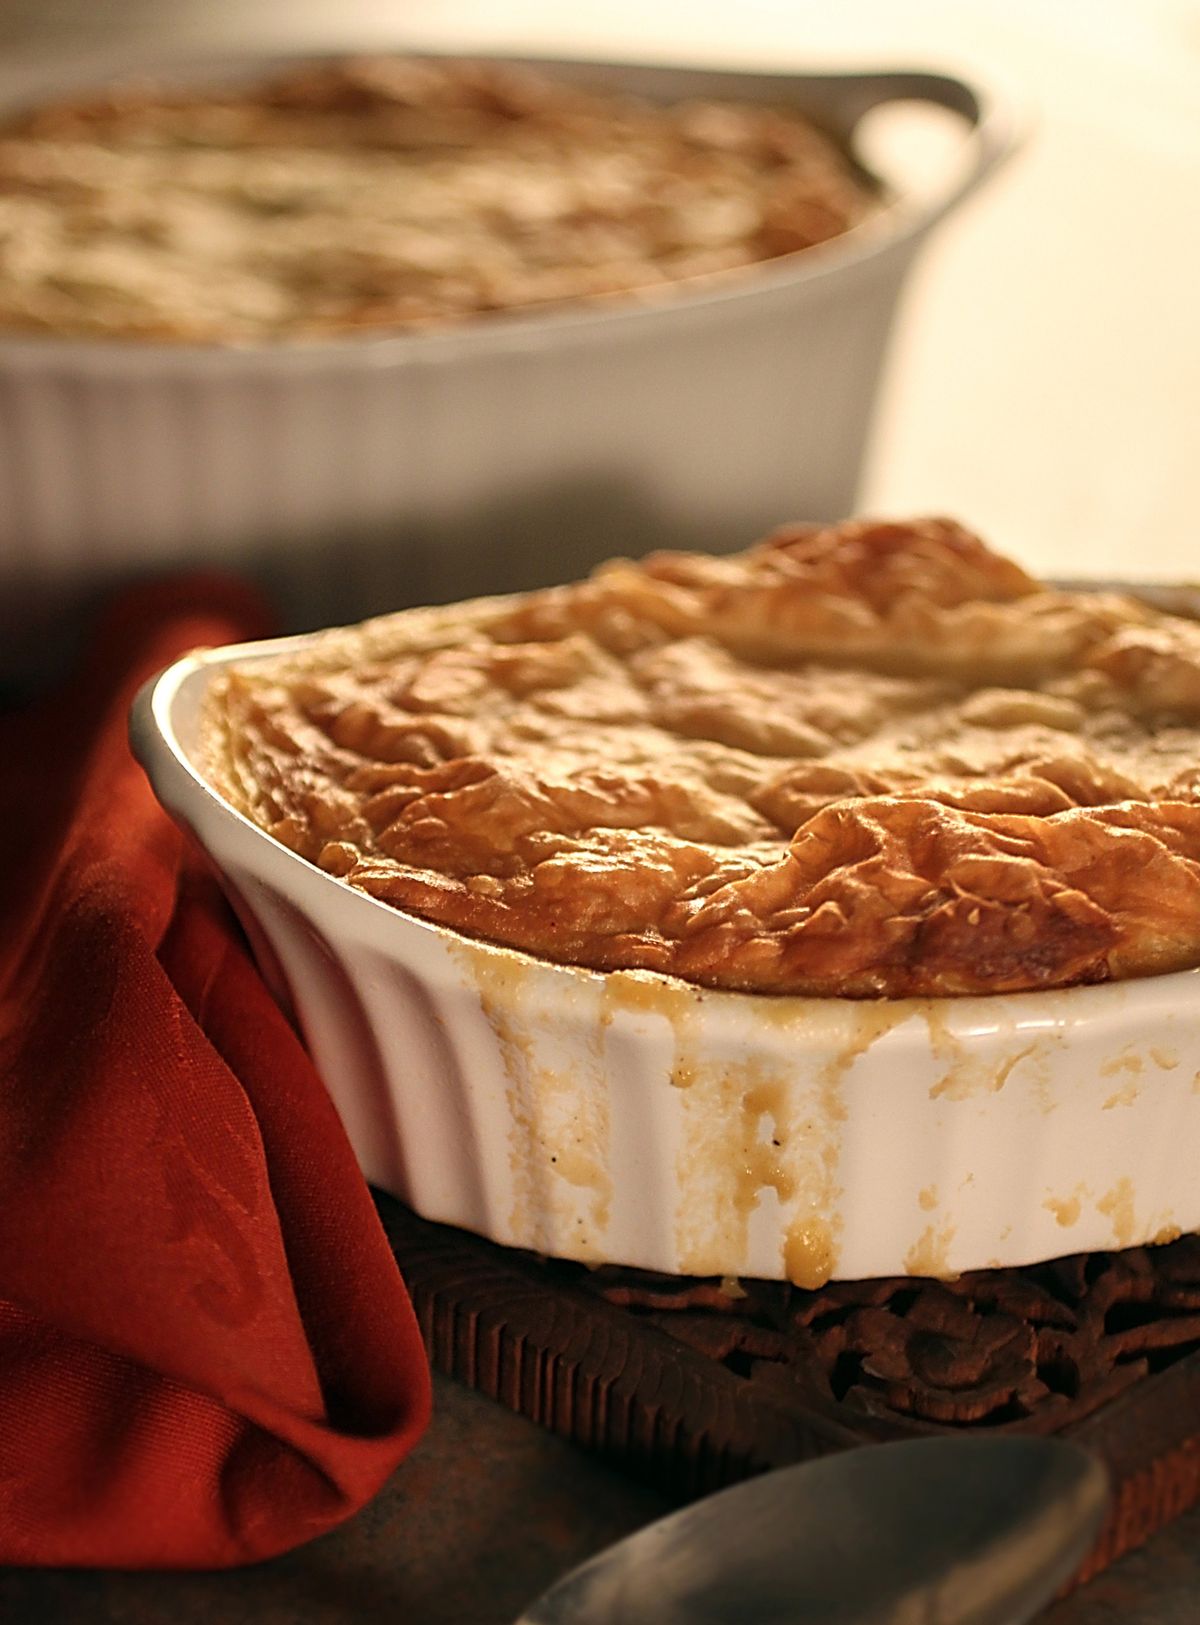 Before sweets took over, pies were hearty dishes.